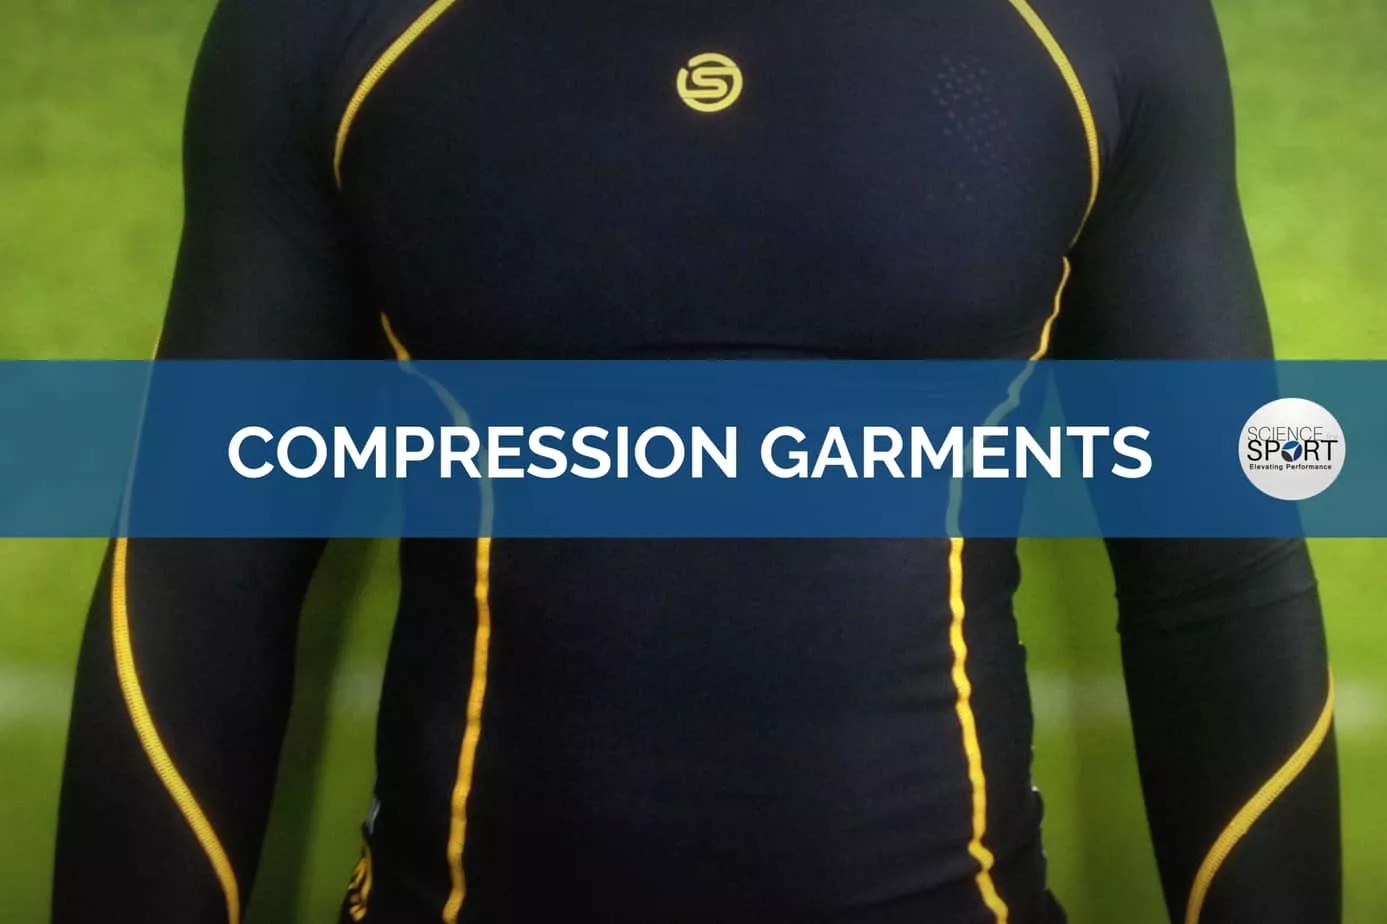 Do compression sports clothes really improve performance?